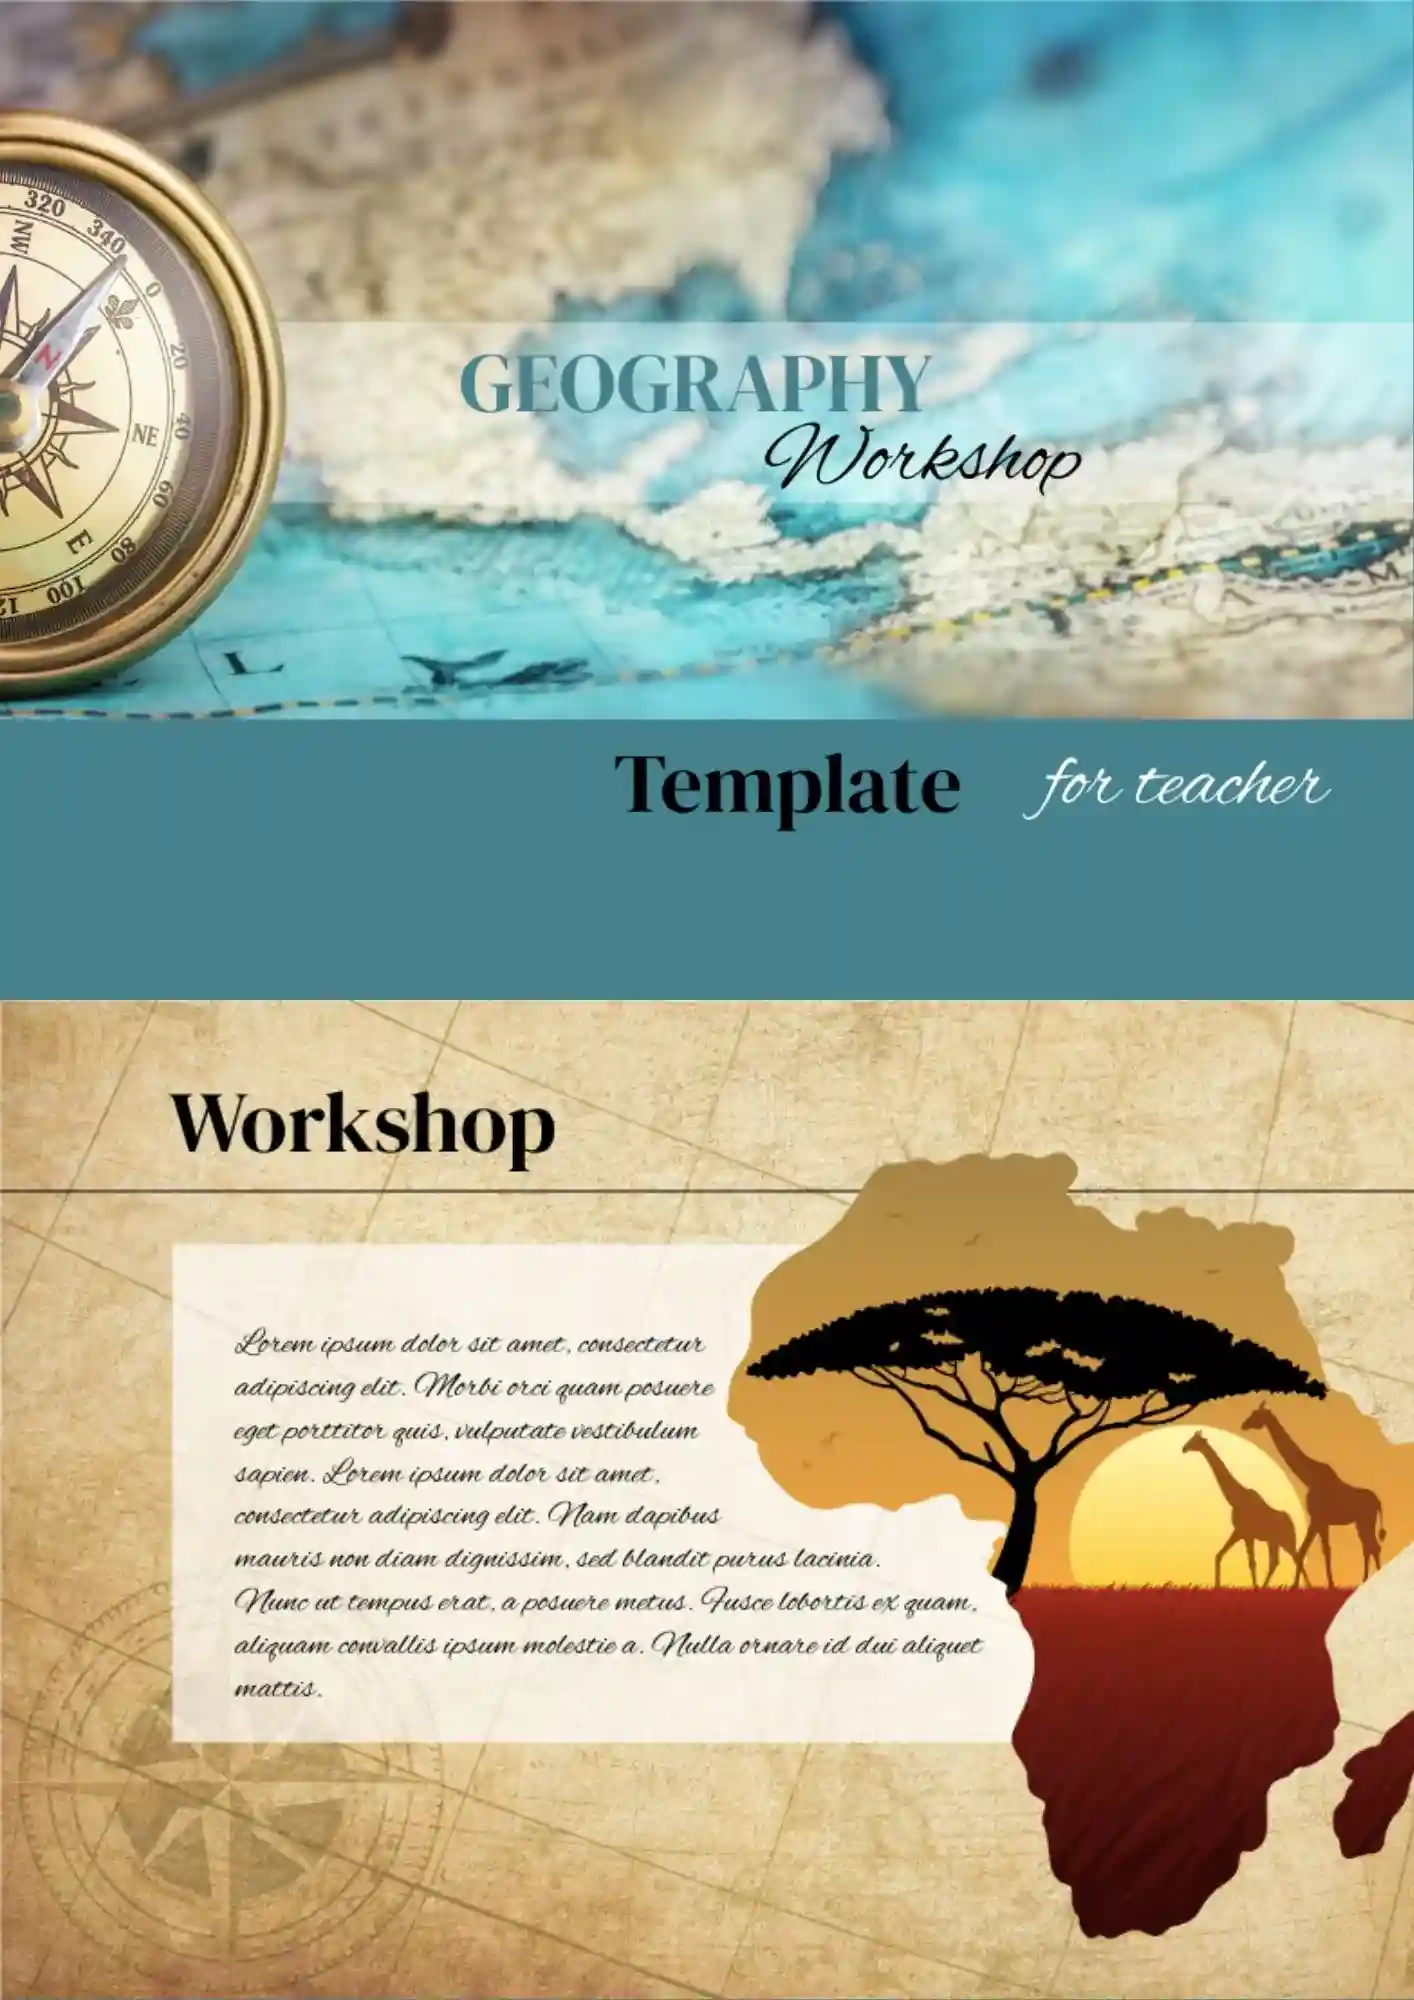 Geography Workshop Template